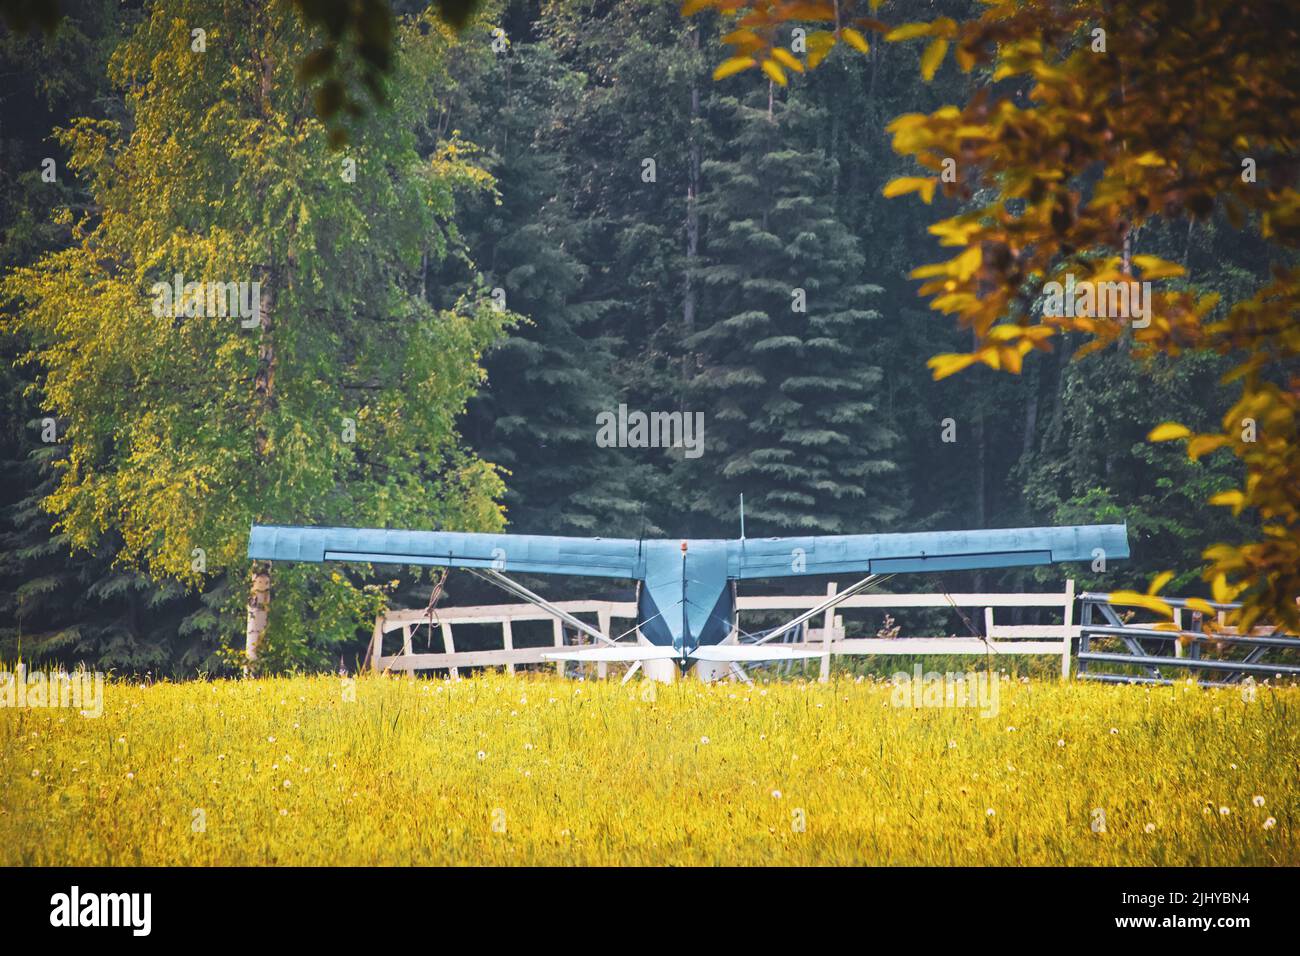 Blue small airplane parked in field near white wooden fence with blurred background of evergreen forest Stock Photo